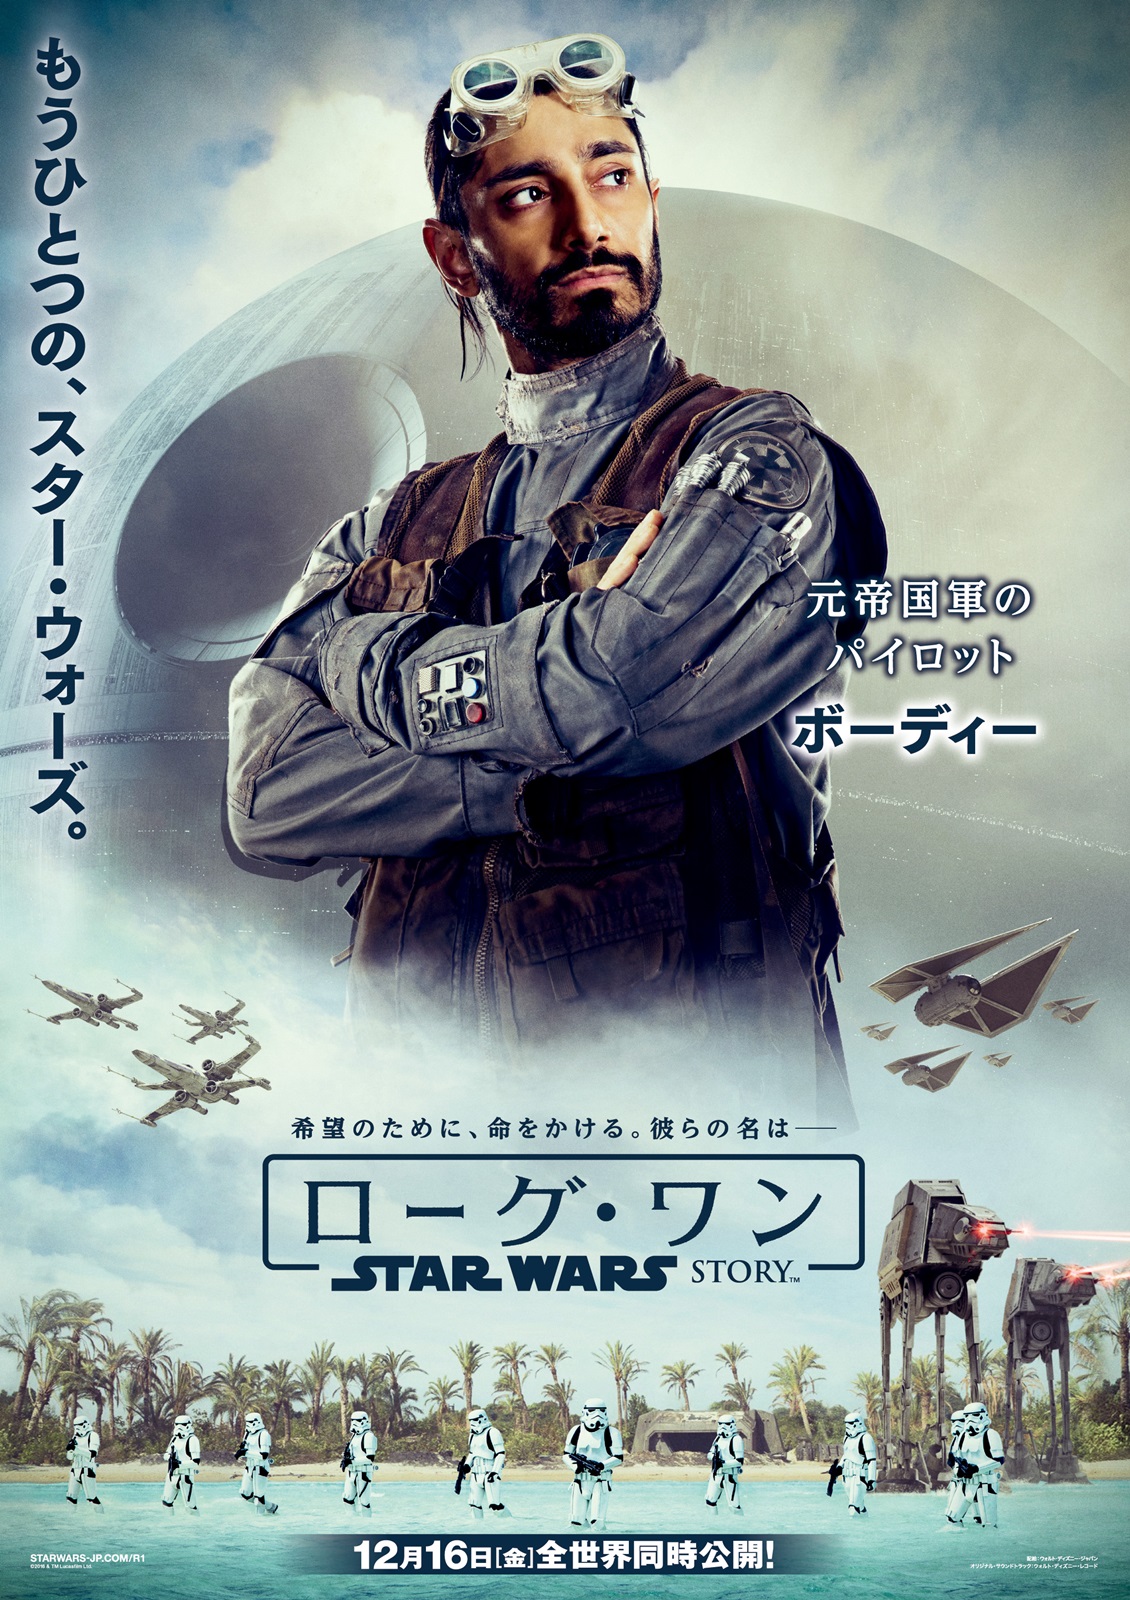 Rogue-One-Japanese-Poster-Bodhi.jpg